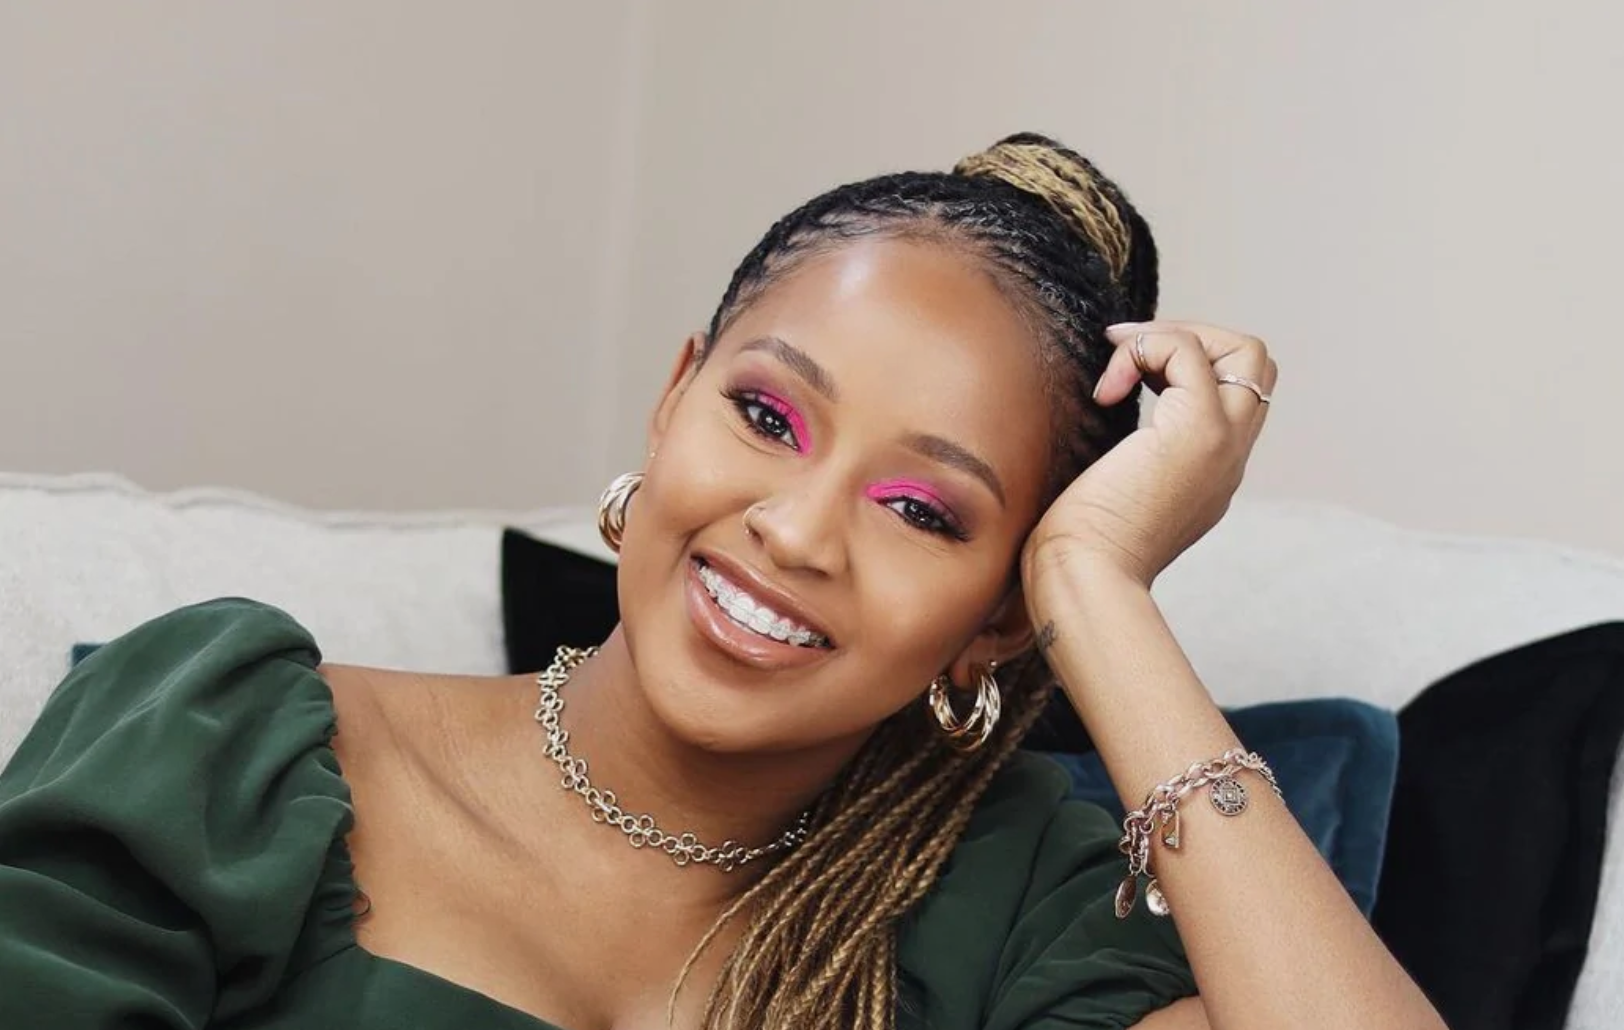 Nompumelelo Ledwaba Speaks About Her Meal Goals This Year